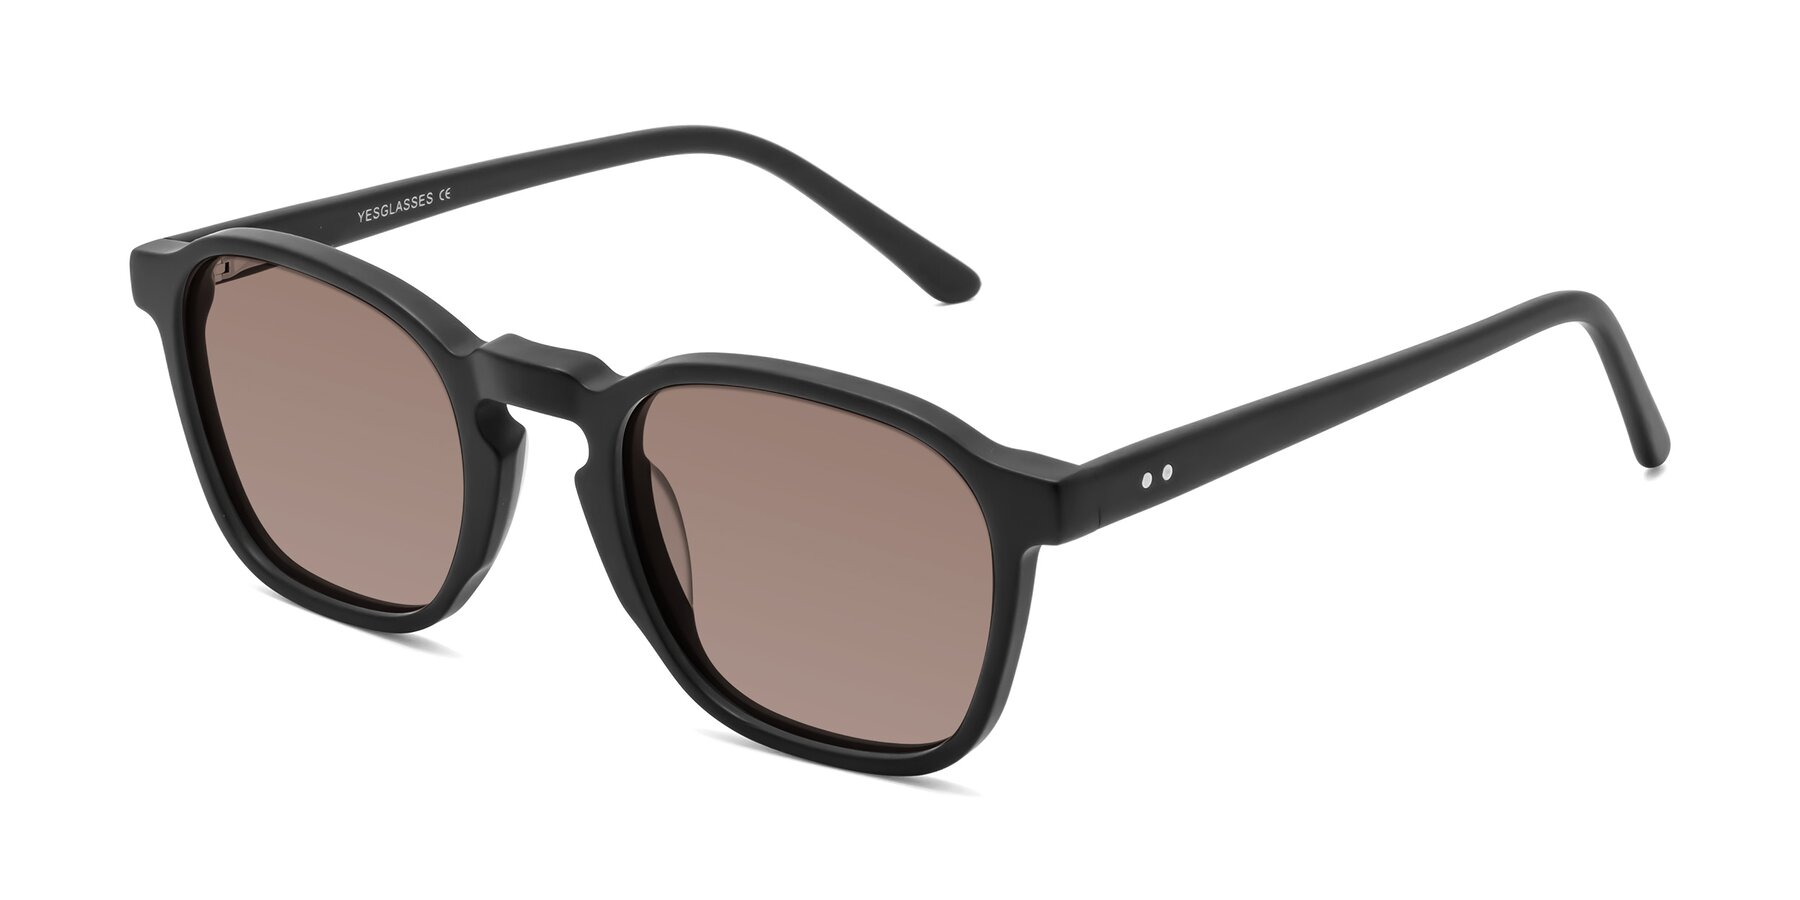 Angle of Generous in Matte Black with Medium Brown Tinted Lenses